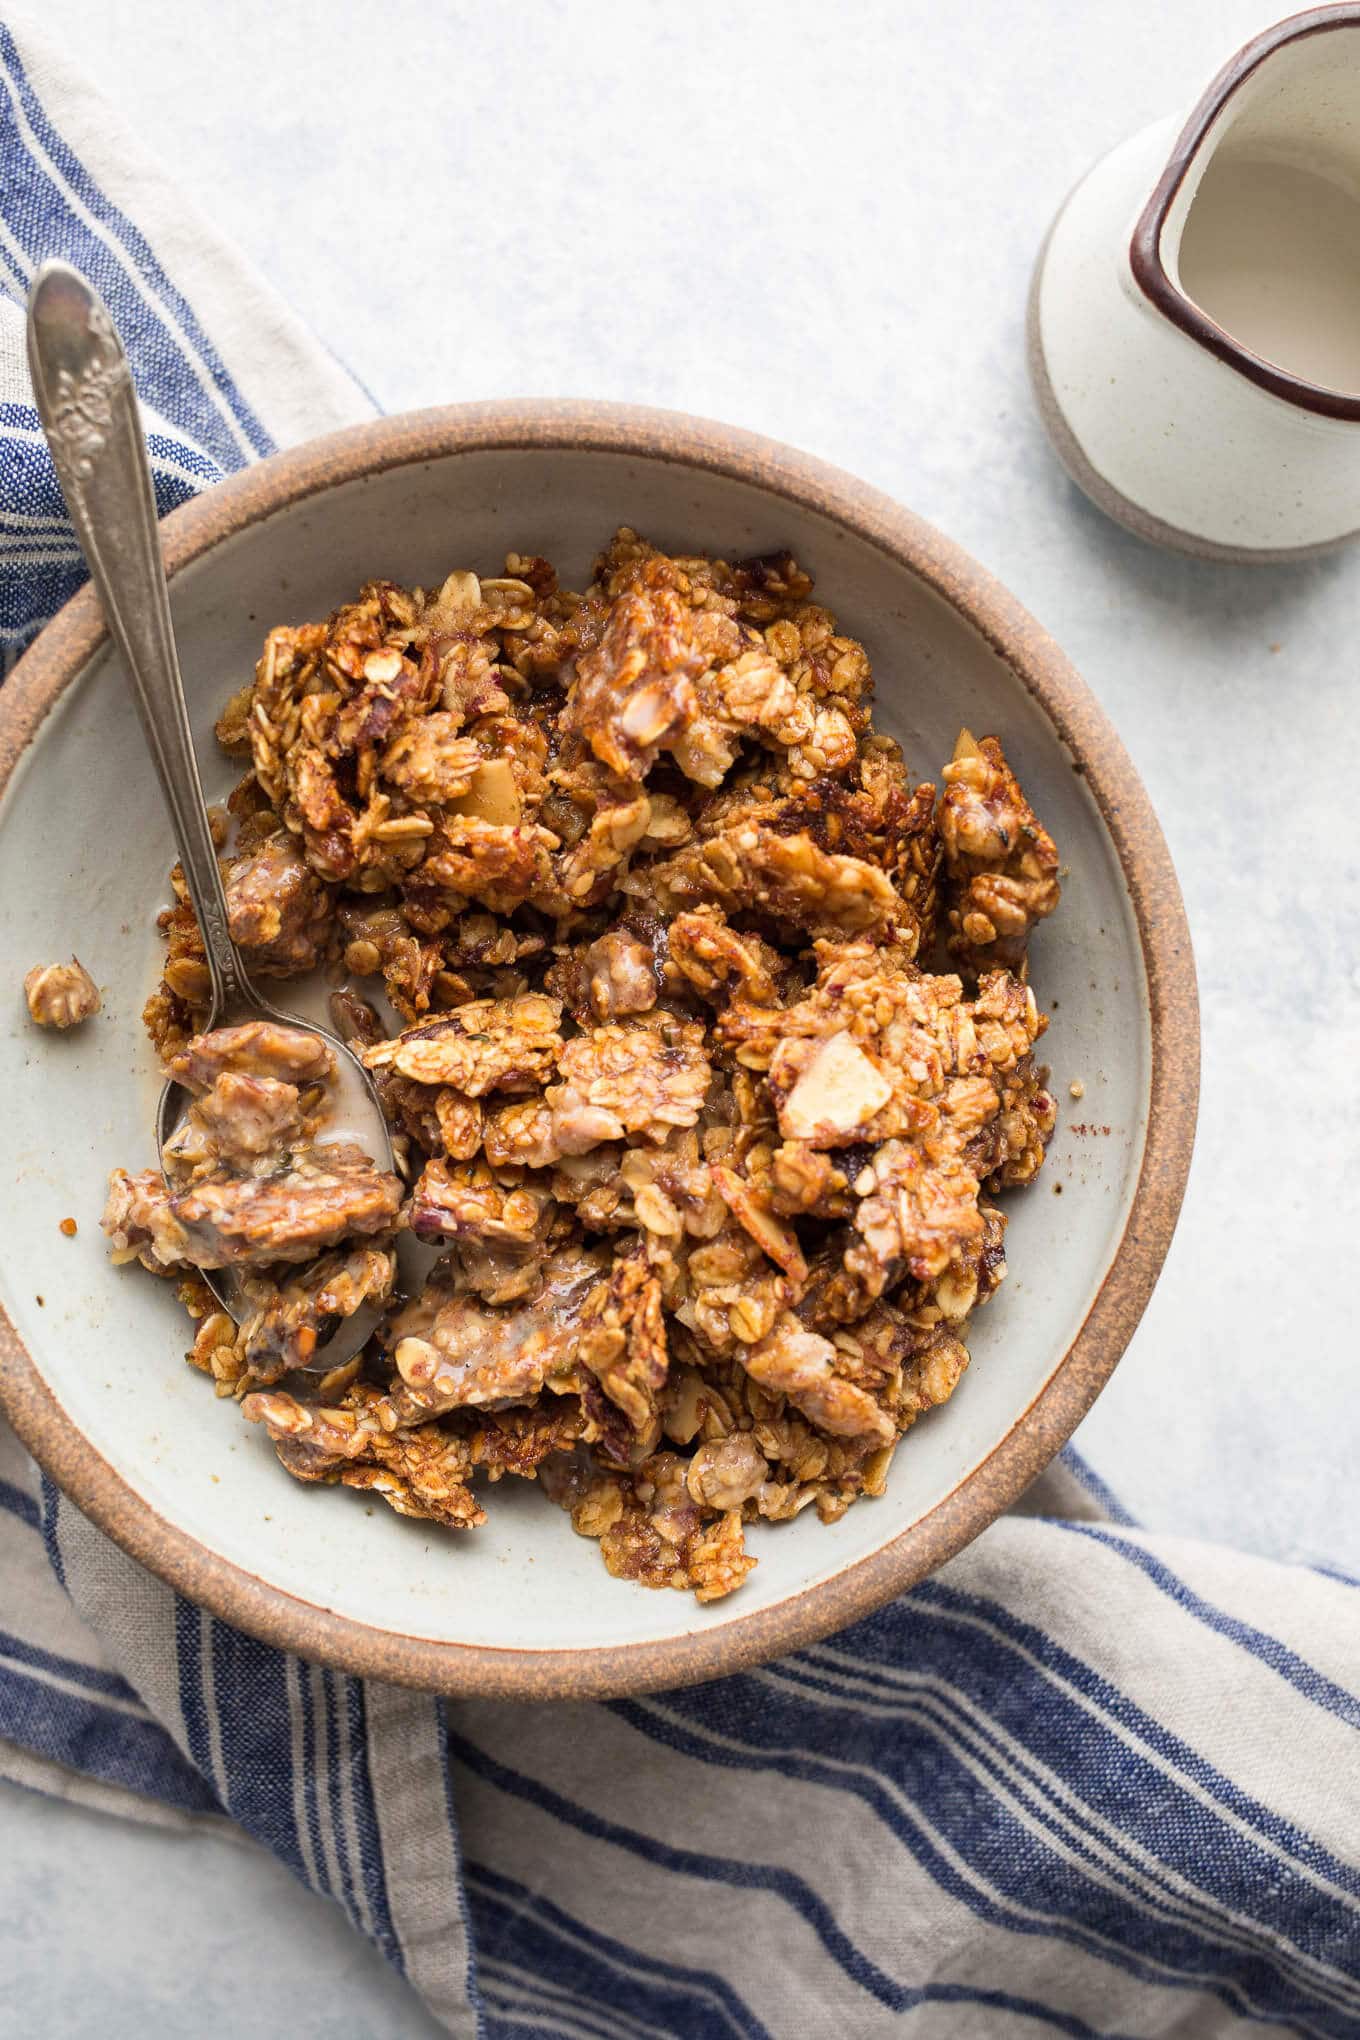 An easy Maple Date Granola recipe that will have you coming back for more. Naturally sweetened with maple syrup and Medjool dates and loaded with gluten-free oats, almonds, hemp seeds, and flaxseeds. Gluten-free and vegan.